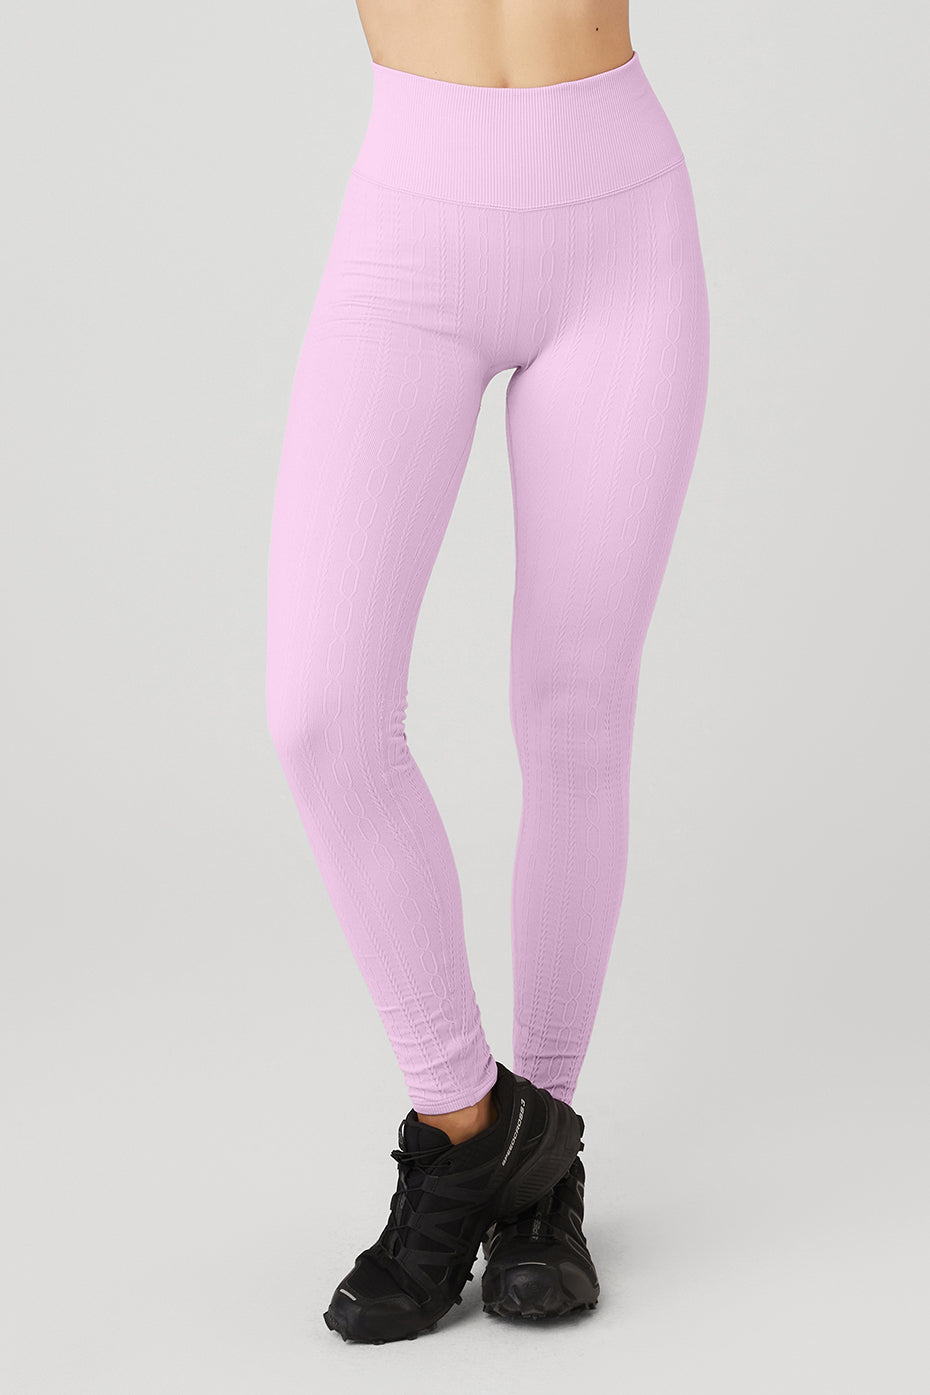 Ombre Ultra Pink High Waisted Legging - Niyama Sol - simplyWORKOUT